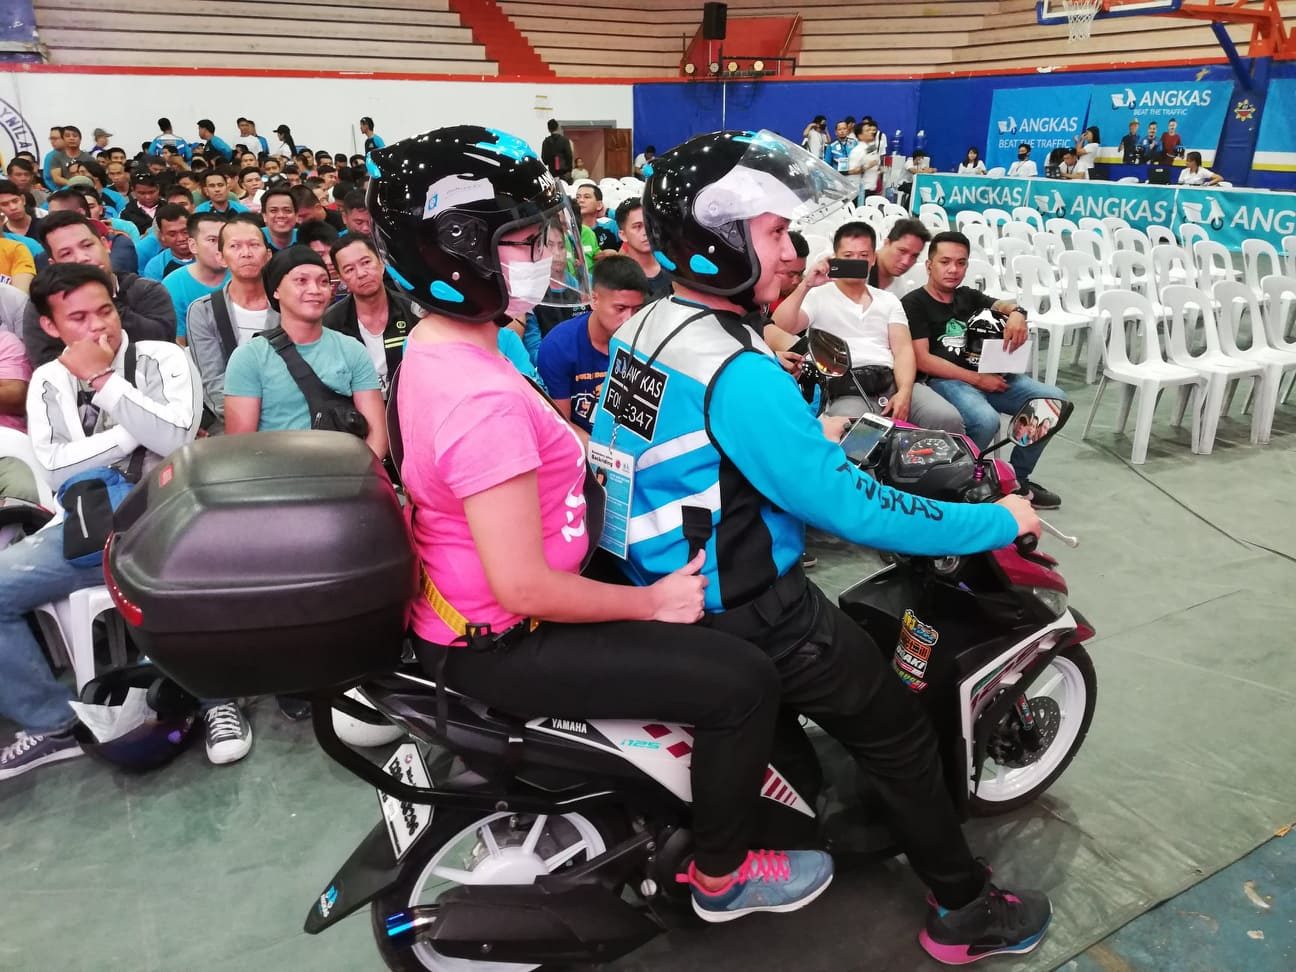 RETRAINING. Angkas says they are retraining about 2,000 drivers a day in San Andres Complex in Manila. 